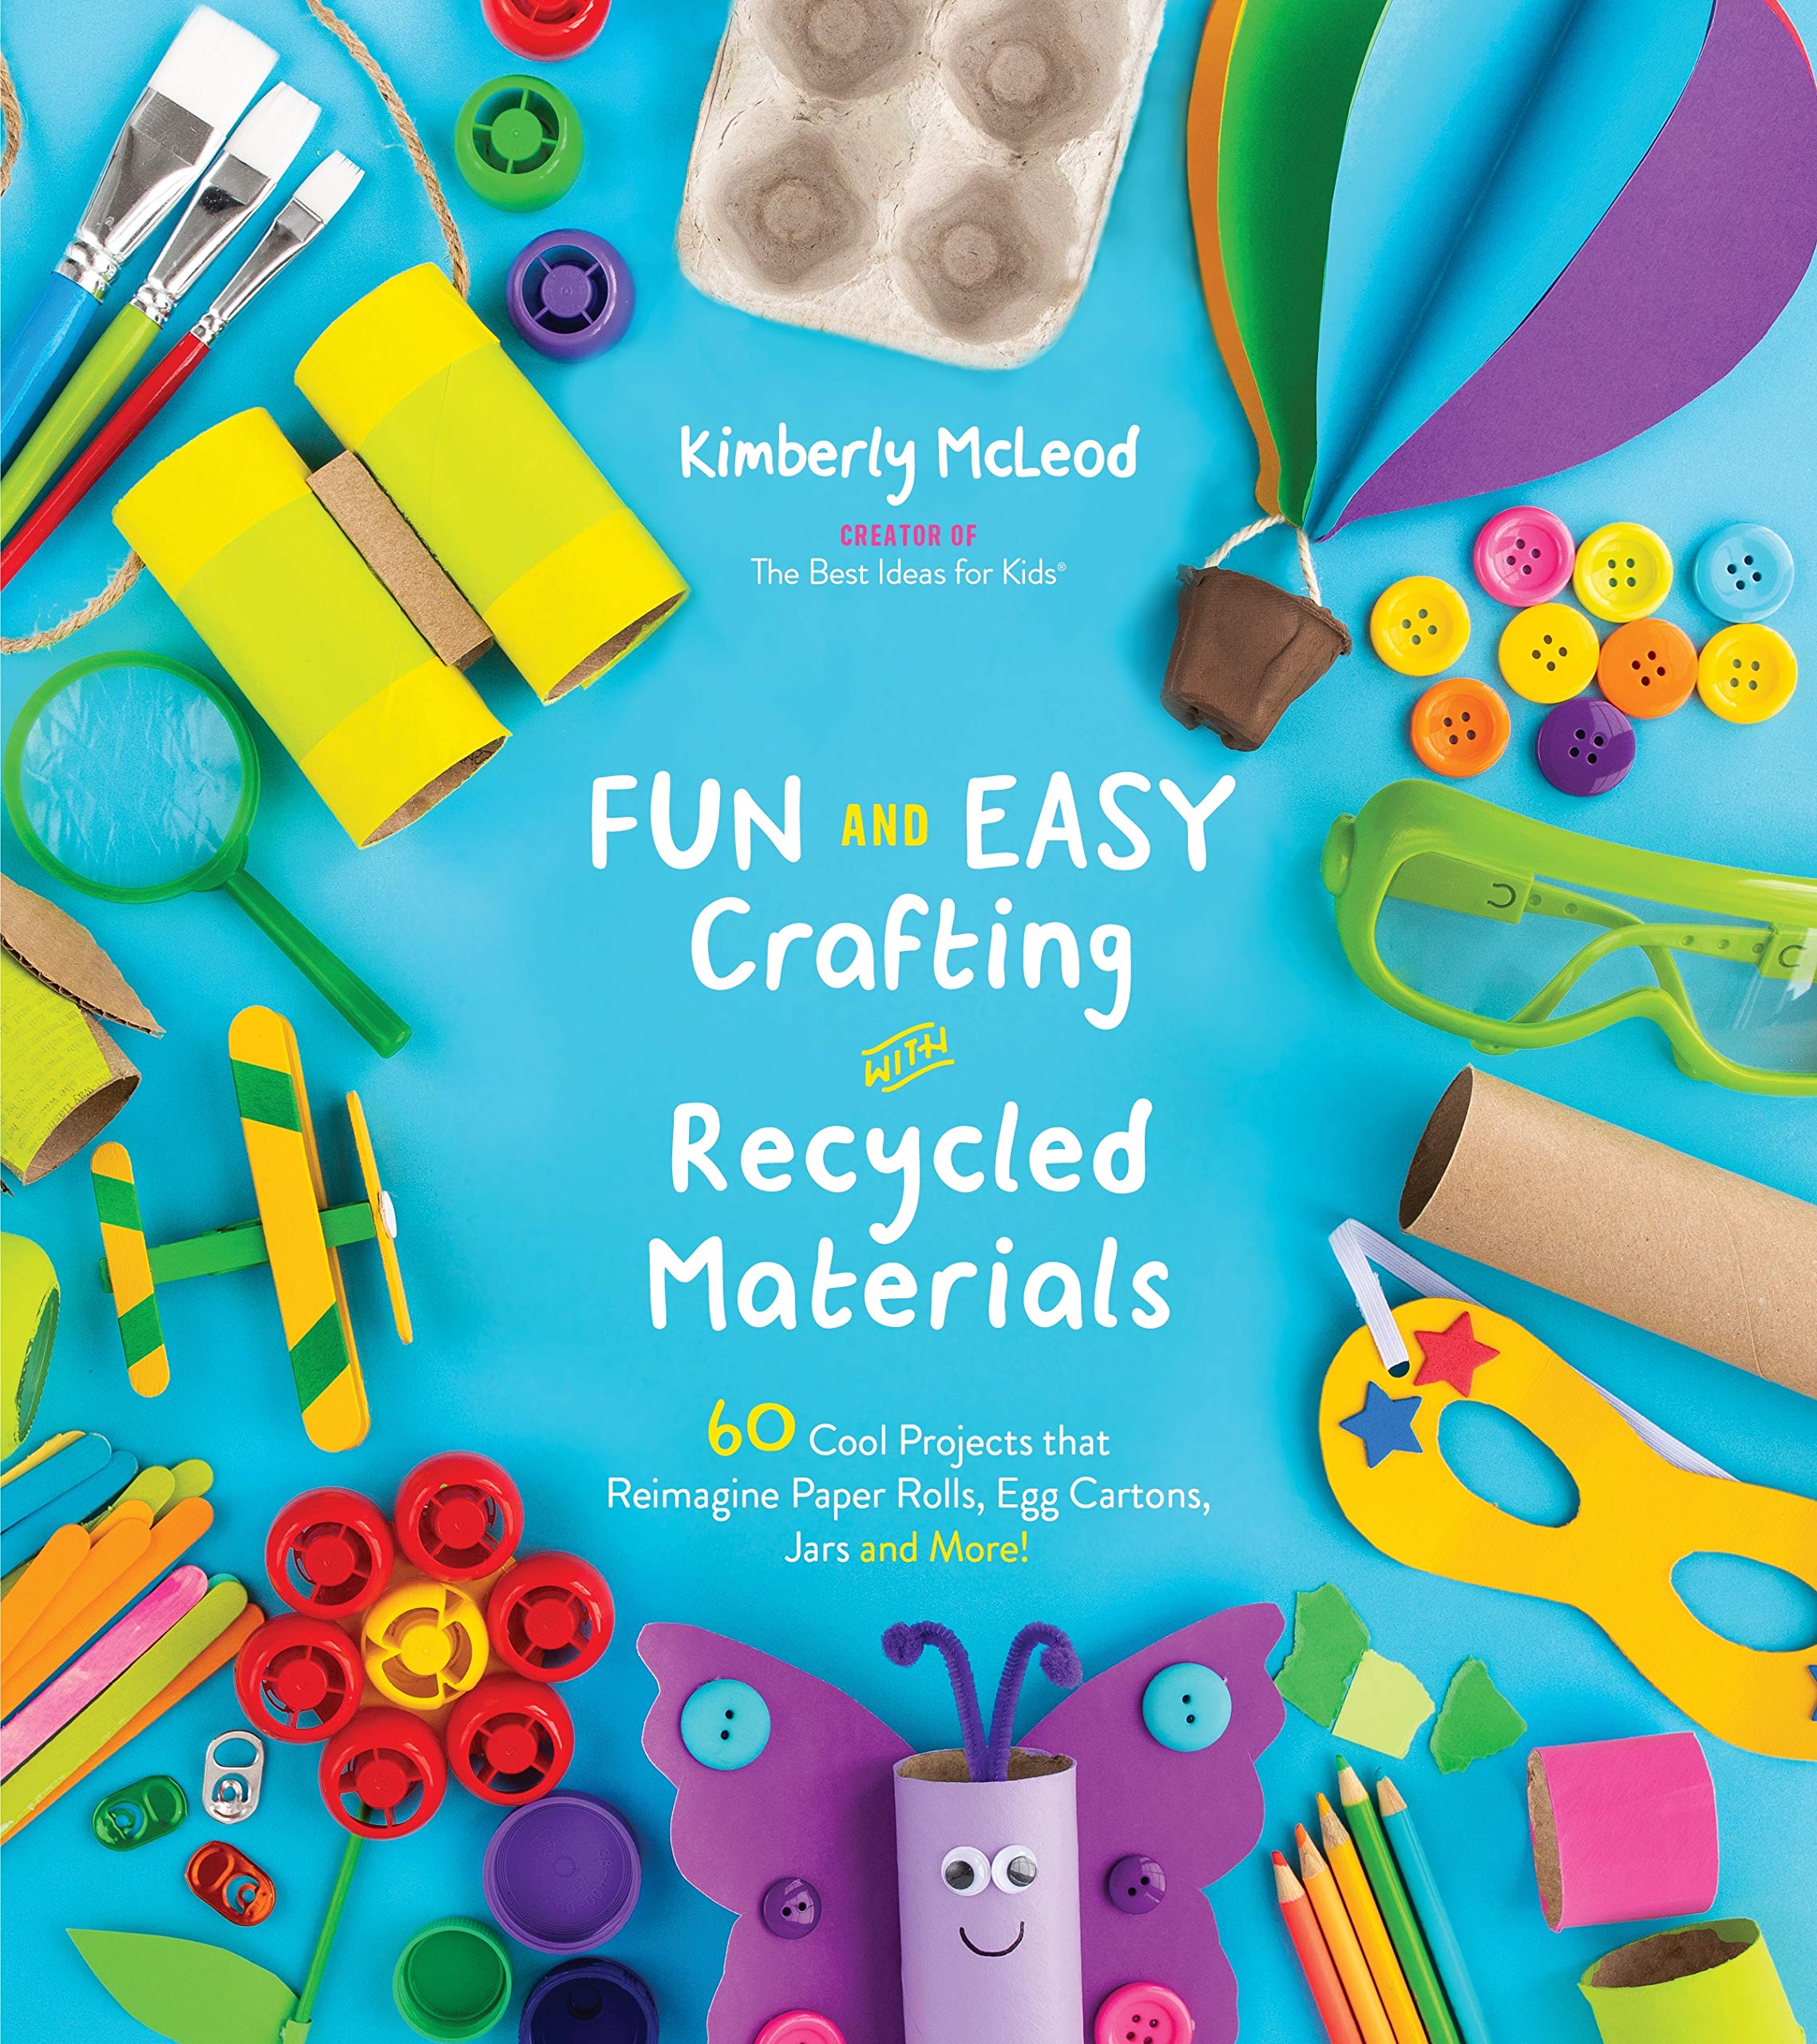 Fun and Easy Crafting with Recycled Materials: 60 Cool Projects